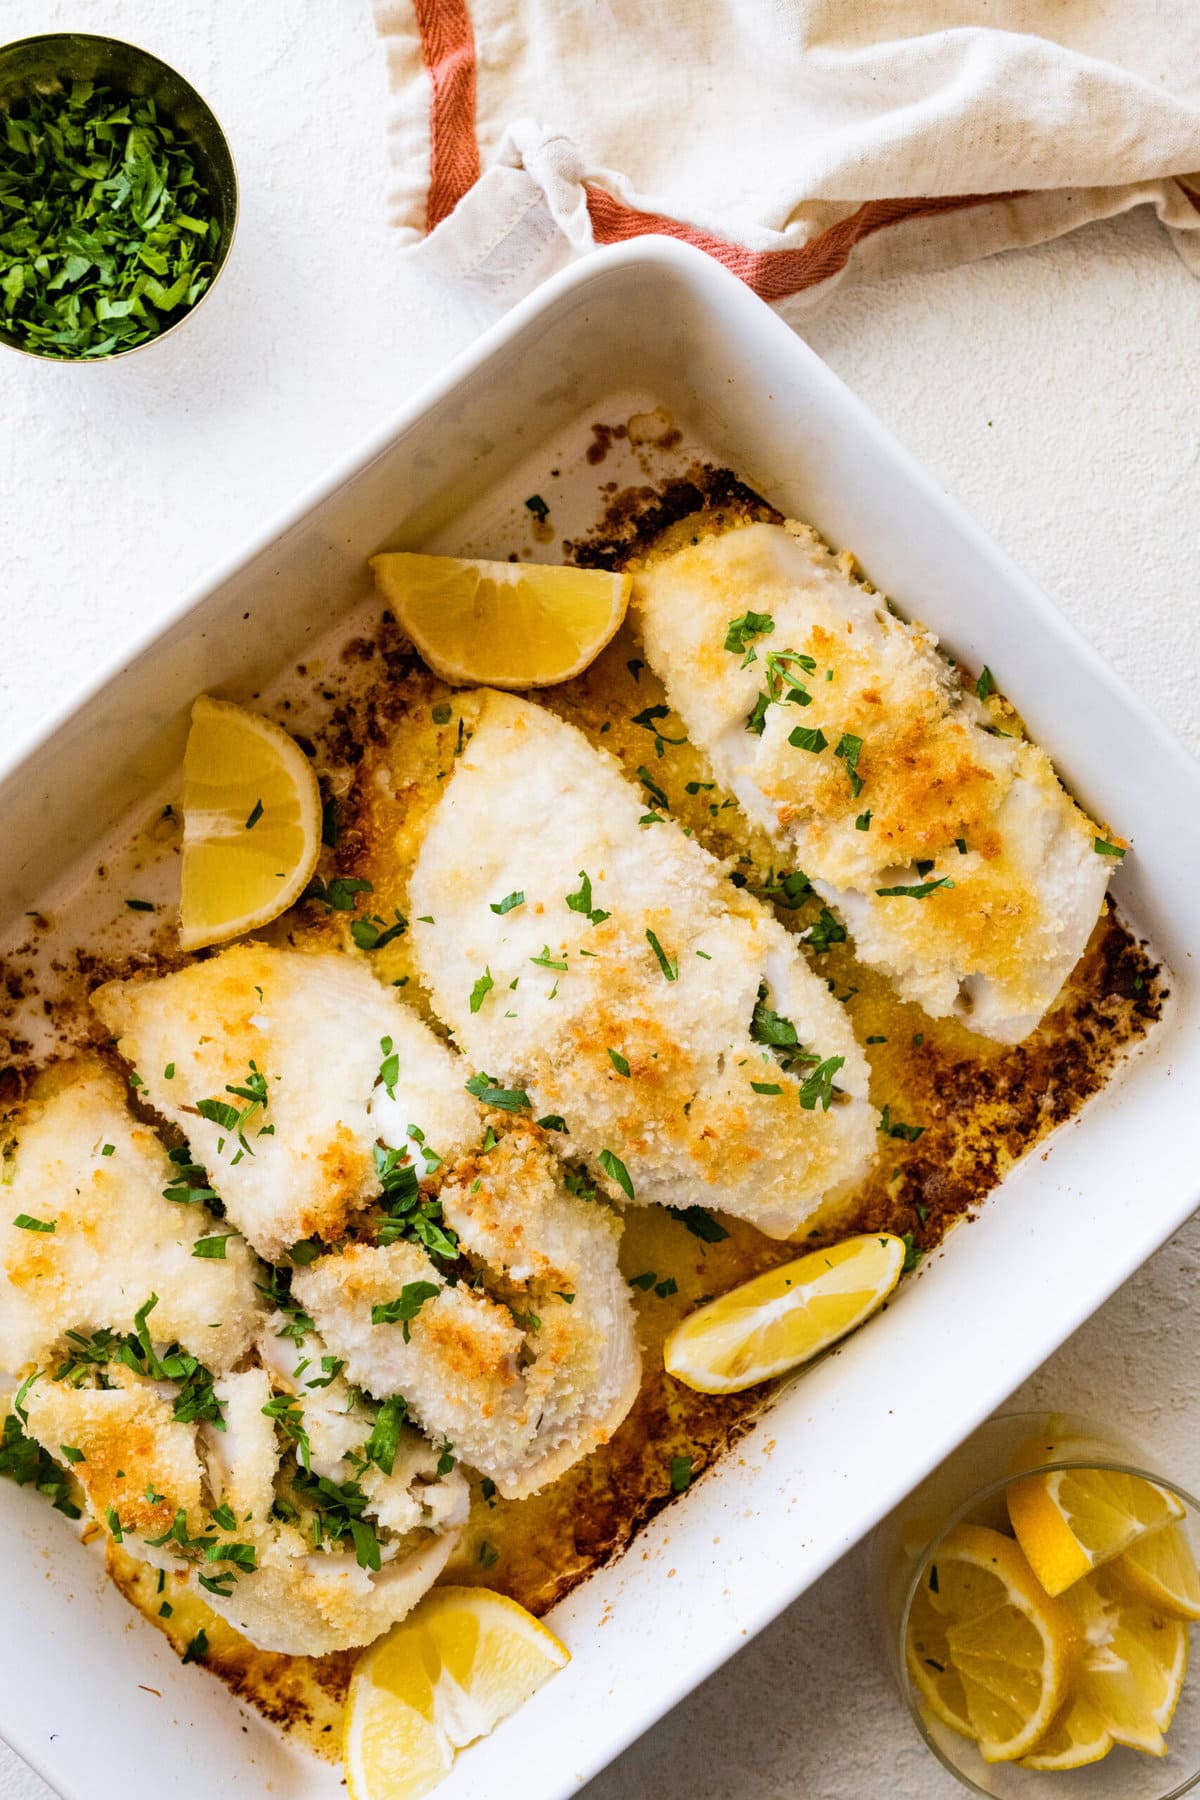 How to make stuffed flounder recipe- baked fish out of the oven in a white pan. Serve with lemon wedges.